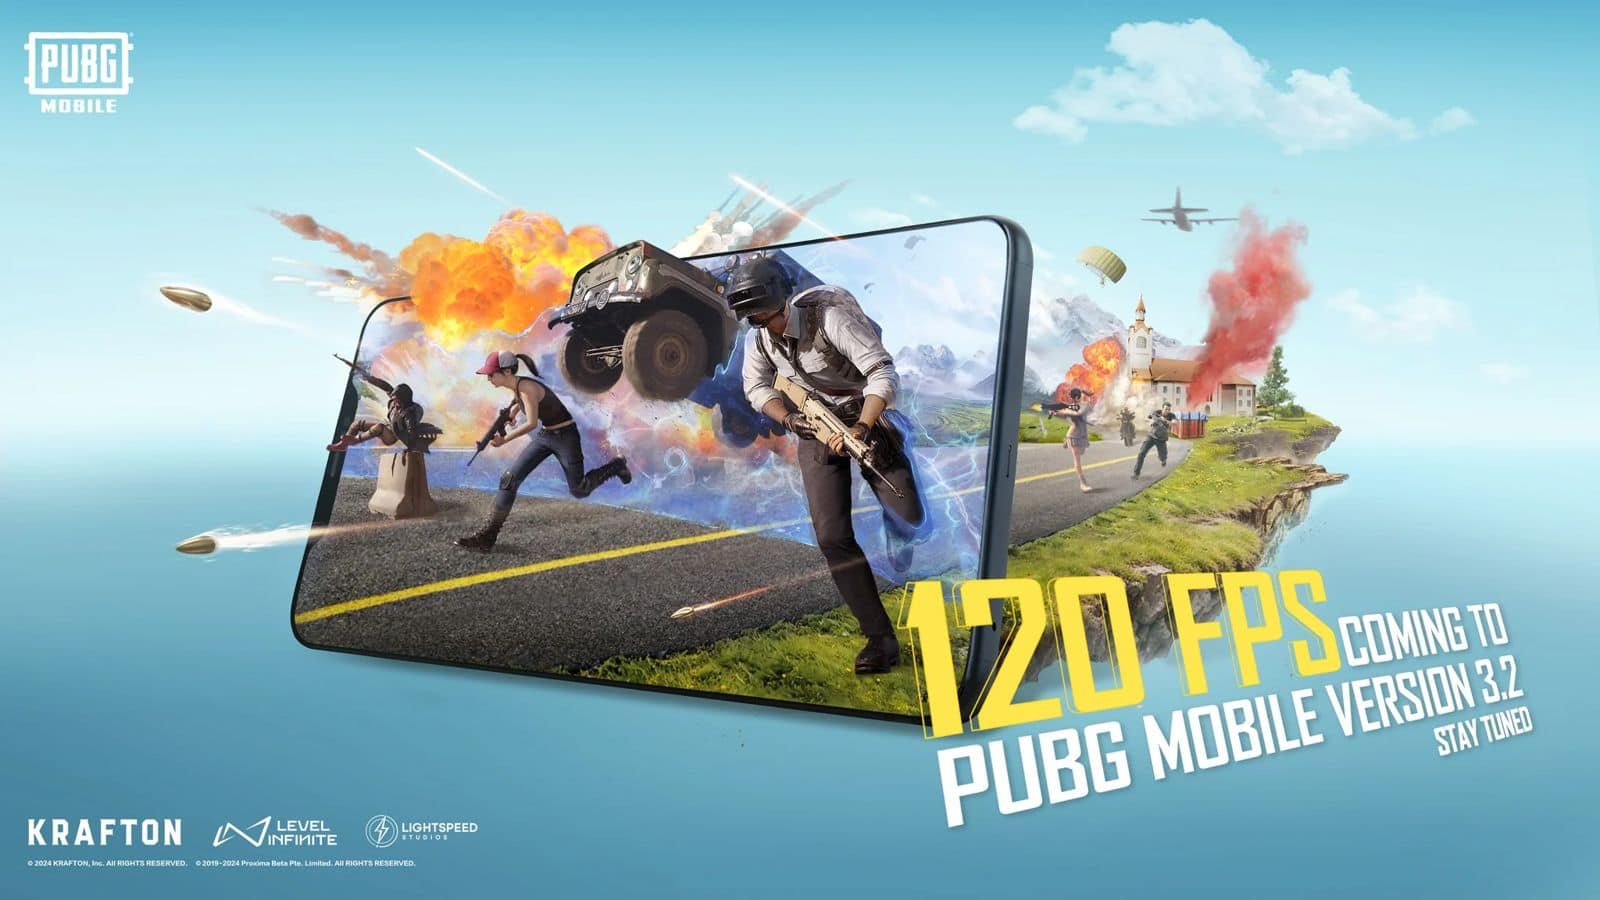 Soon you'll be able to play PUBG Mobile at 120fps